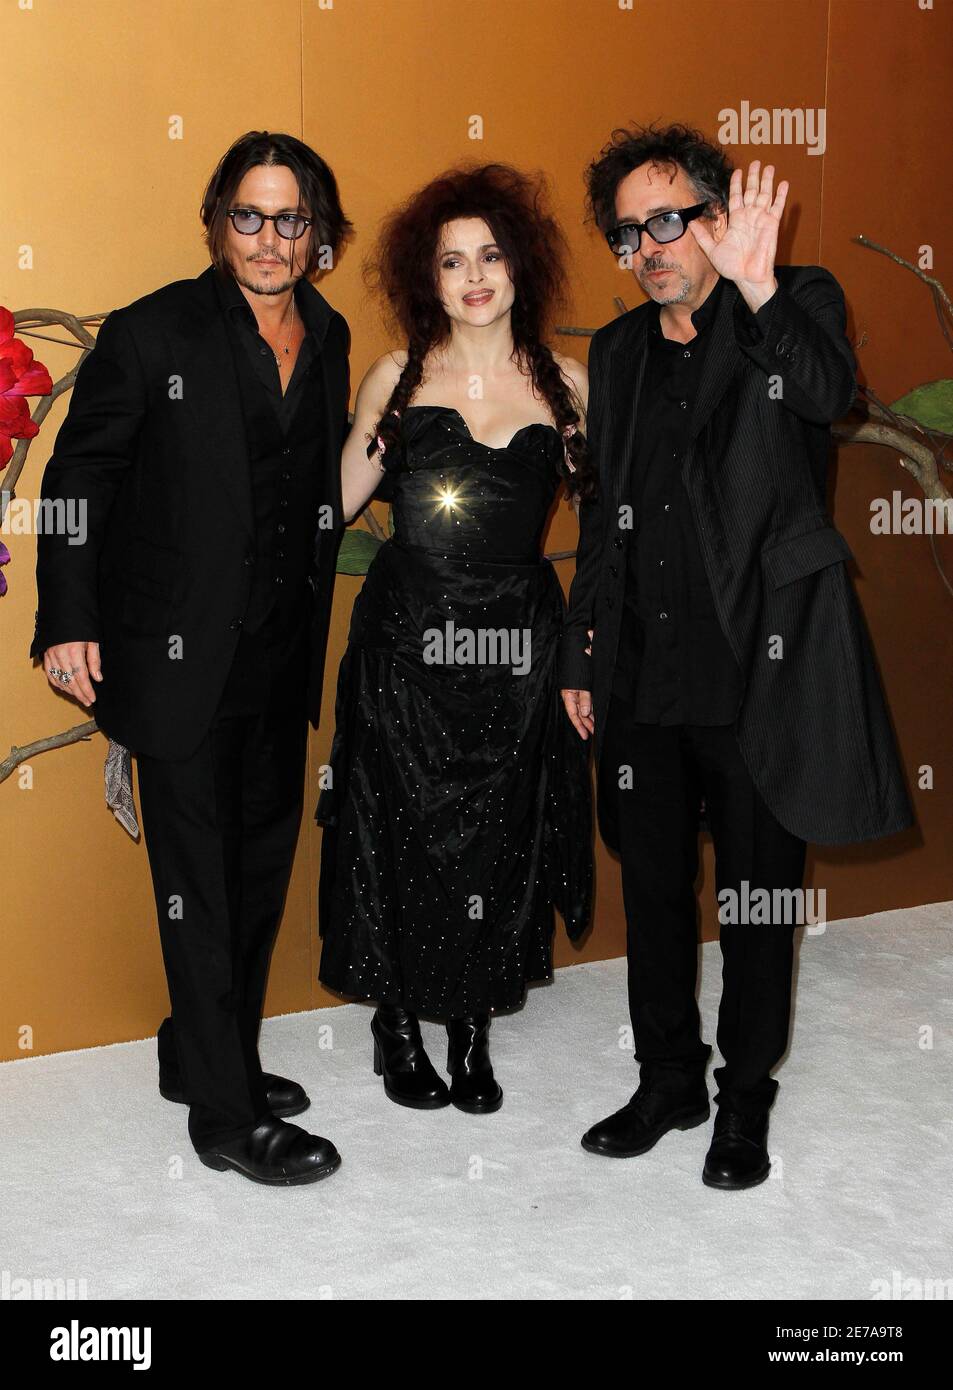 Actor Johnny Depp (L) arrives with actress Helena Bonham Carter (C) and  director Tim Burton for a Museum of Modern Art tribute to Burton in New  York November 17, 2009. REUTERS/Lucas Jackson (